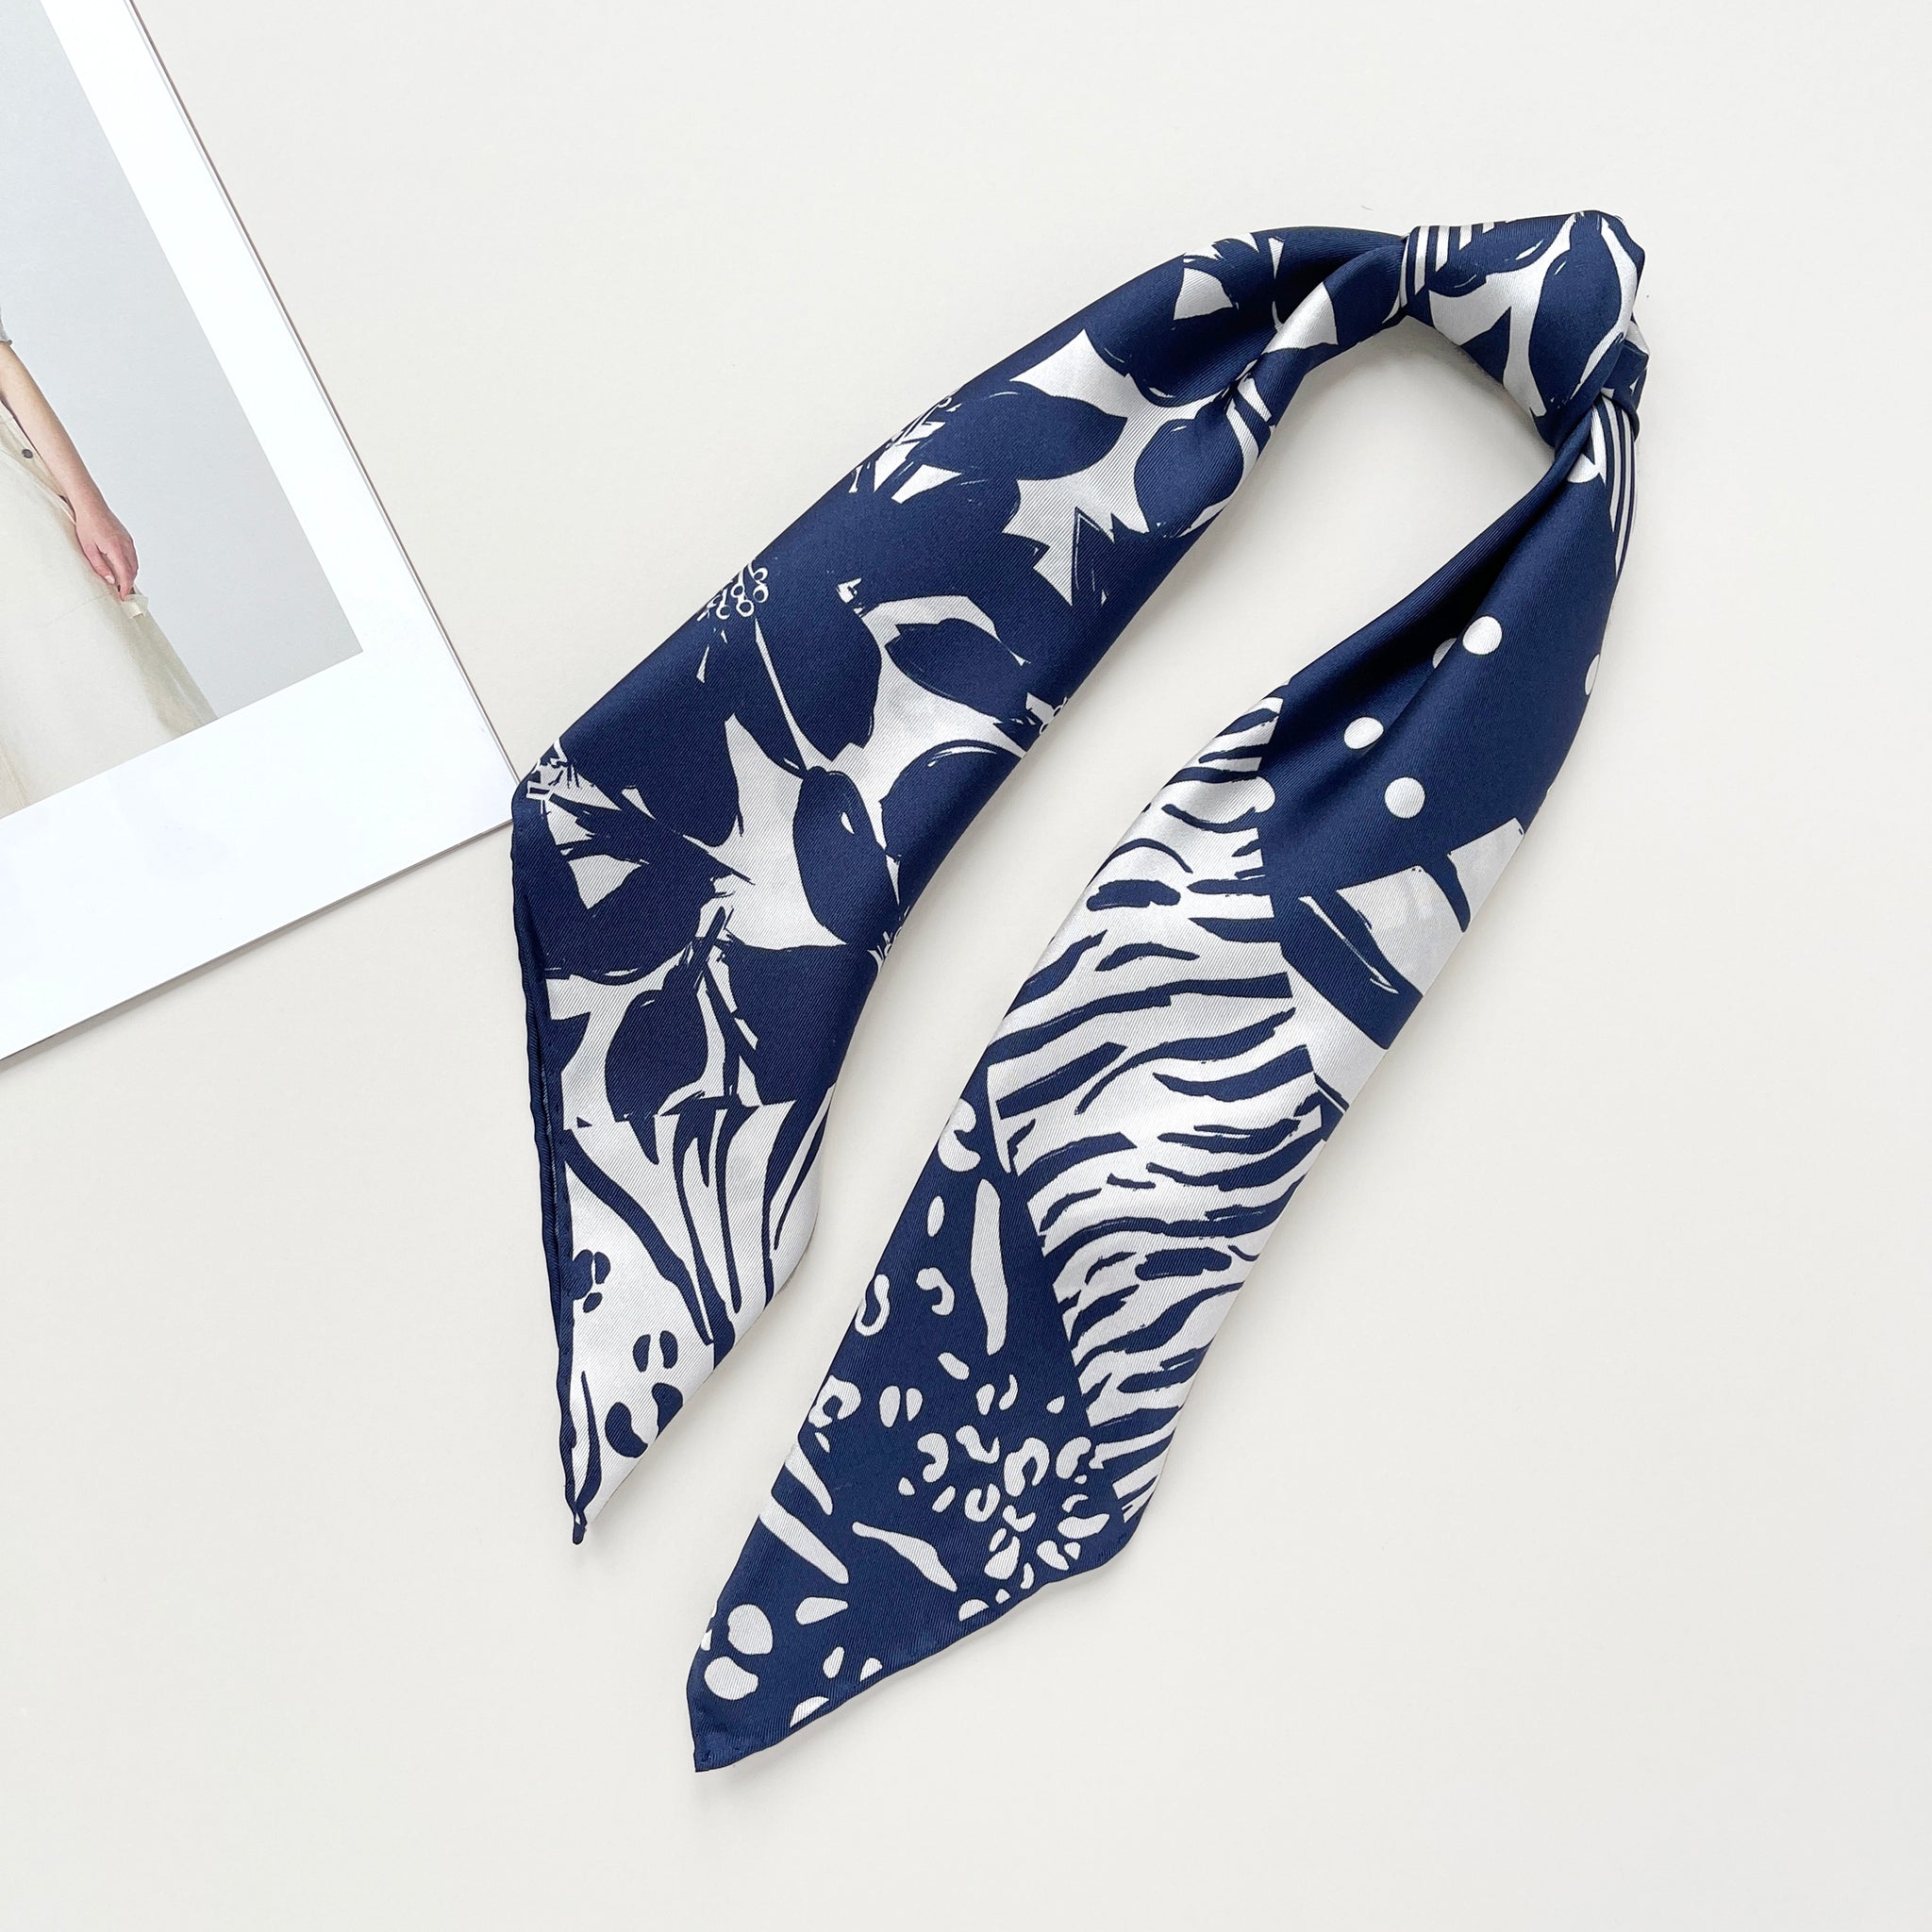 a navy blue and white square silk scarf featuring the combination of floral motifs, polka dots, and stripes prints with hand-rolled edges, tied as a ponytail 